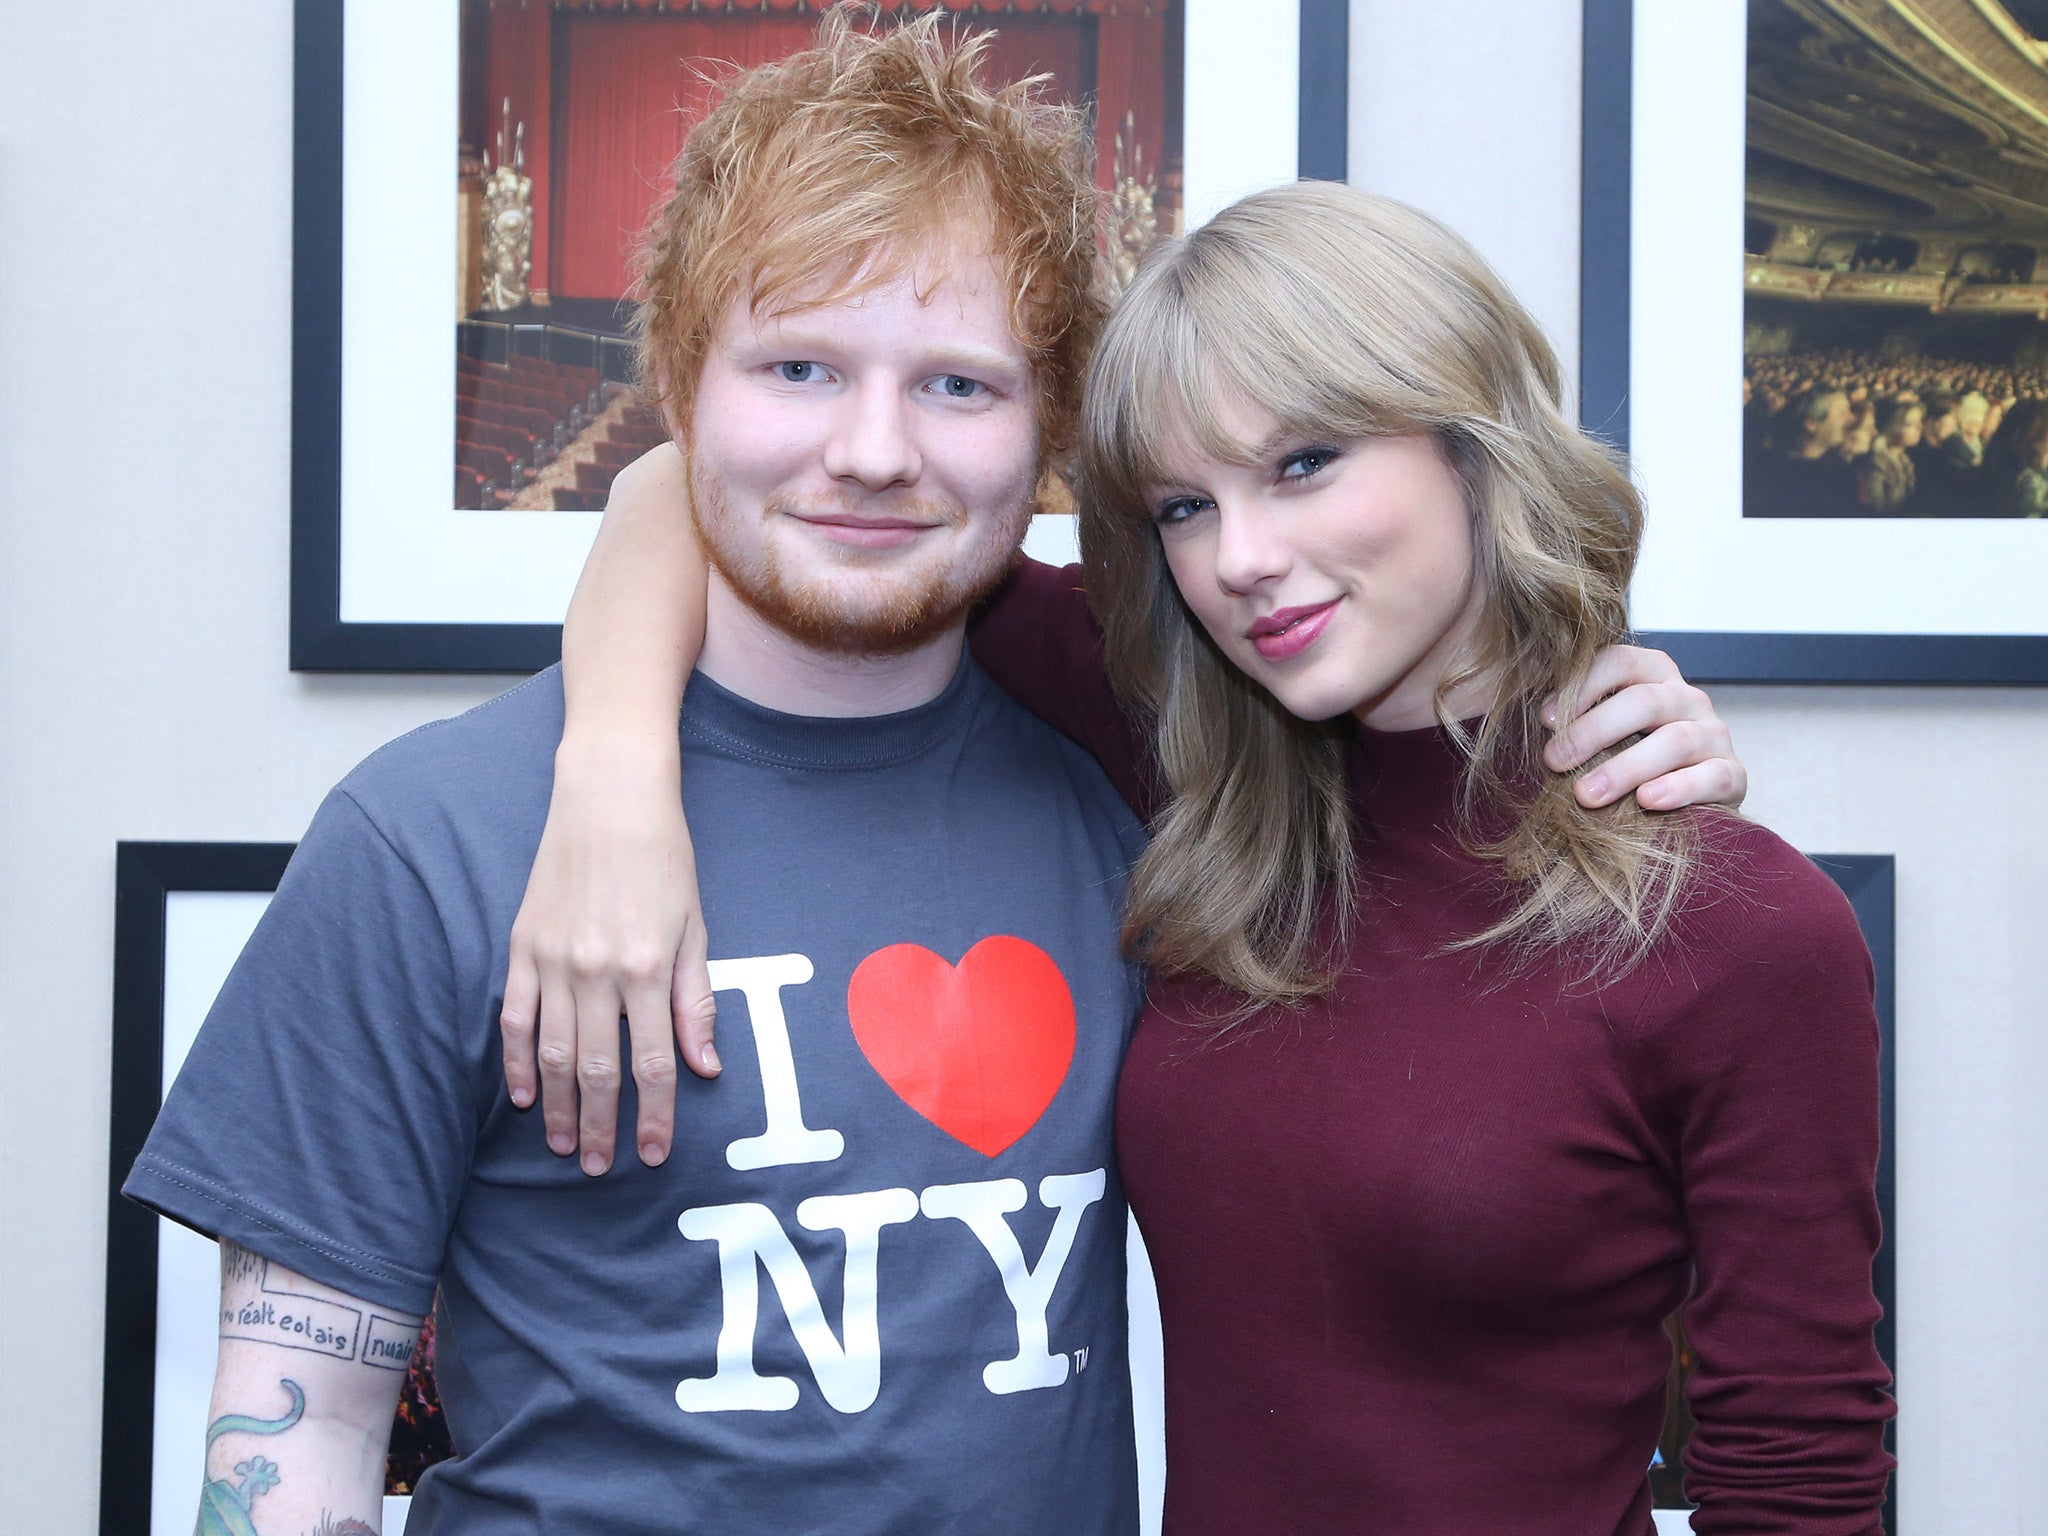 Ed Sheeran hanging out with famous friend Taylor Swift